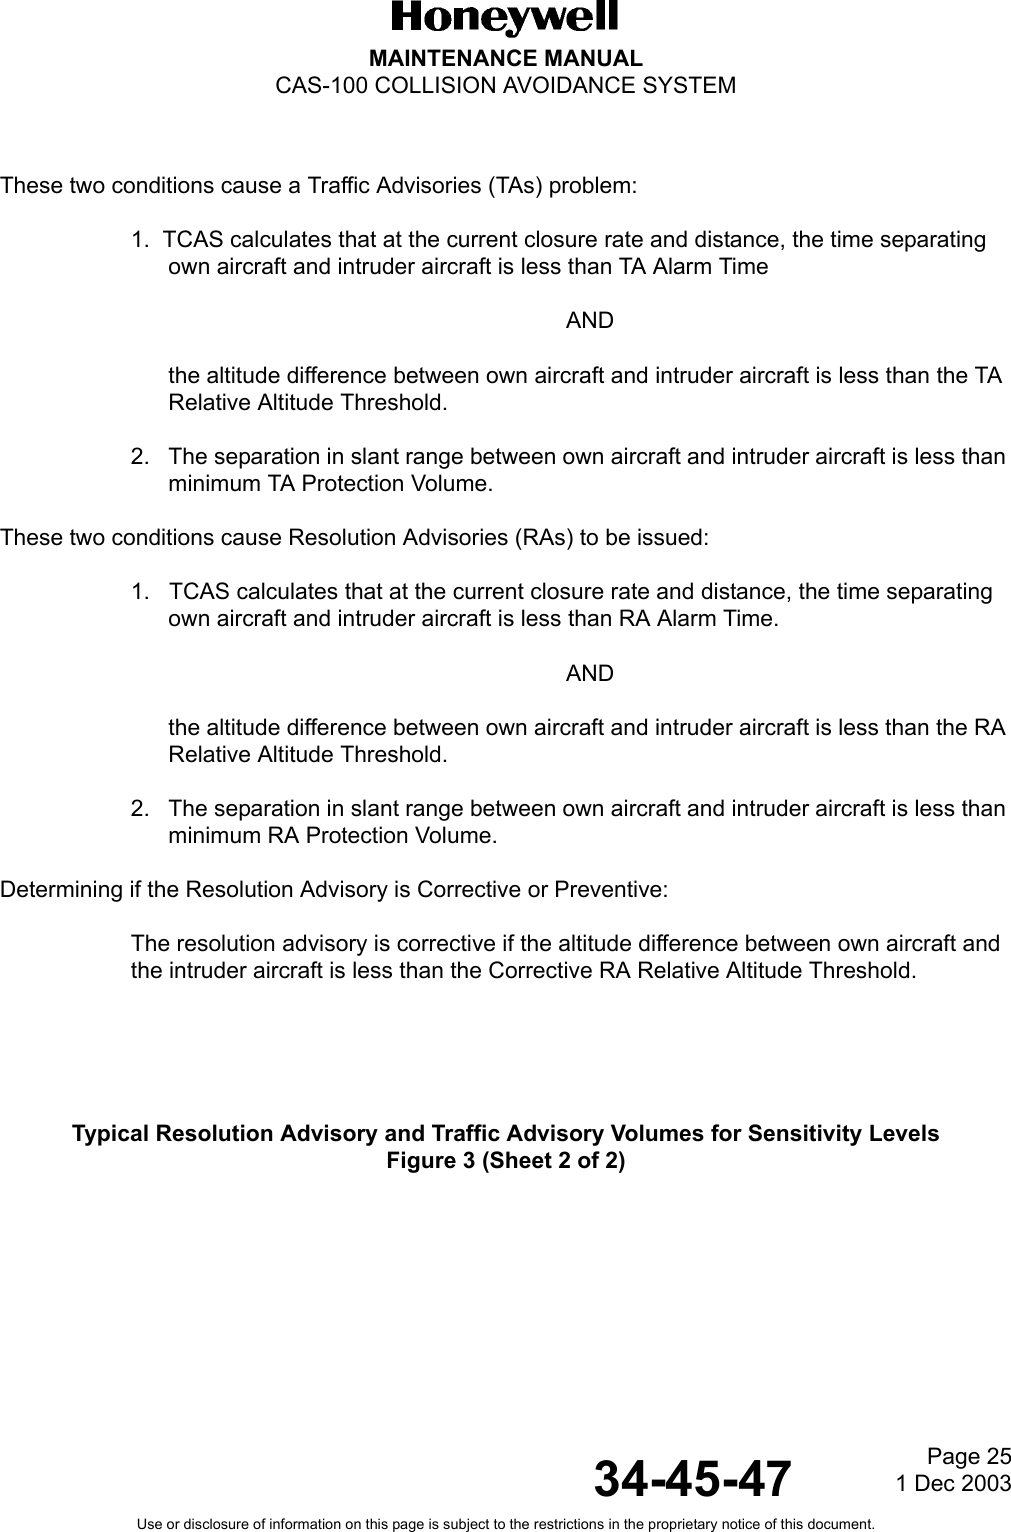 Page 25  1 Dec 200334-45-47MAINTENANCE MANUALCAS-100 COLLISION AVOIDANCE SYSTEMUse or disclosure of information on this page is subject to the restrictions in the proprietary notice of this document.These two conditions cause a Traffic Advisories (TAs) problem:1.  TCAS calculates that at the current closure rate and distance, the time separating own aircraft and intruder aircraft is less than TA Alarm TimeANDthe altitude difference between own aircraft and intruder aircraft is less than the TA Relative Altitude Threshold.2. The separation in slant range between own aircraft and intruder aircraft is less than minimum TA Protection Volume. These two conditions cause Resolution Advisories (RAs) to be issued:1.   TCAS calculates that at the current closure rate and distance, the time separating own aircraft and intruder aircraft is less than RA Alarm Time.ANDthe altitude difference between own aircraft and intruder aircraft is less than the RA Relative Altitude Threshold.2. The separation in slant range between own aircraft and intruder aircraft is less than minimum RA Protection Volume. Determining if the Resolution Advisory is Corrective or Preventive:  The resolution advisory is corrective if the altitude difference between own aircraft and the intruder aircraft is less than the Corrective RA Relative Altitude Threshold.Typical Resolution Advisory and Traffic Advisory Volumes for Sensitivity LevelsFigure 3 (Sheet 2 of 2)